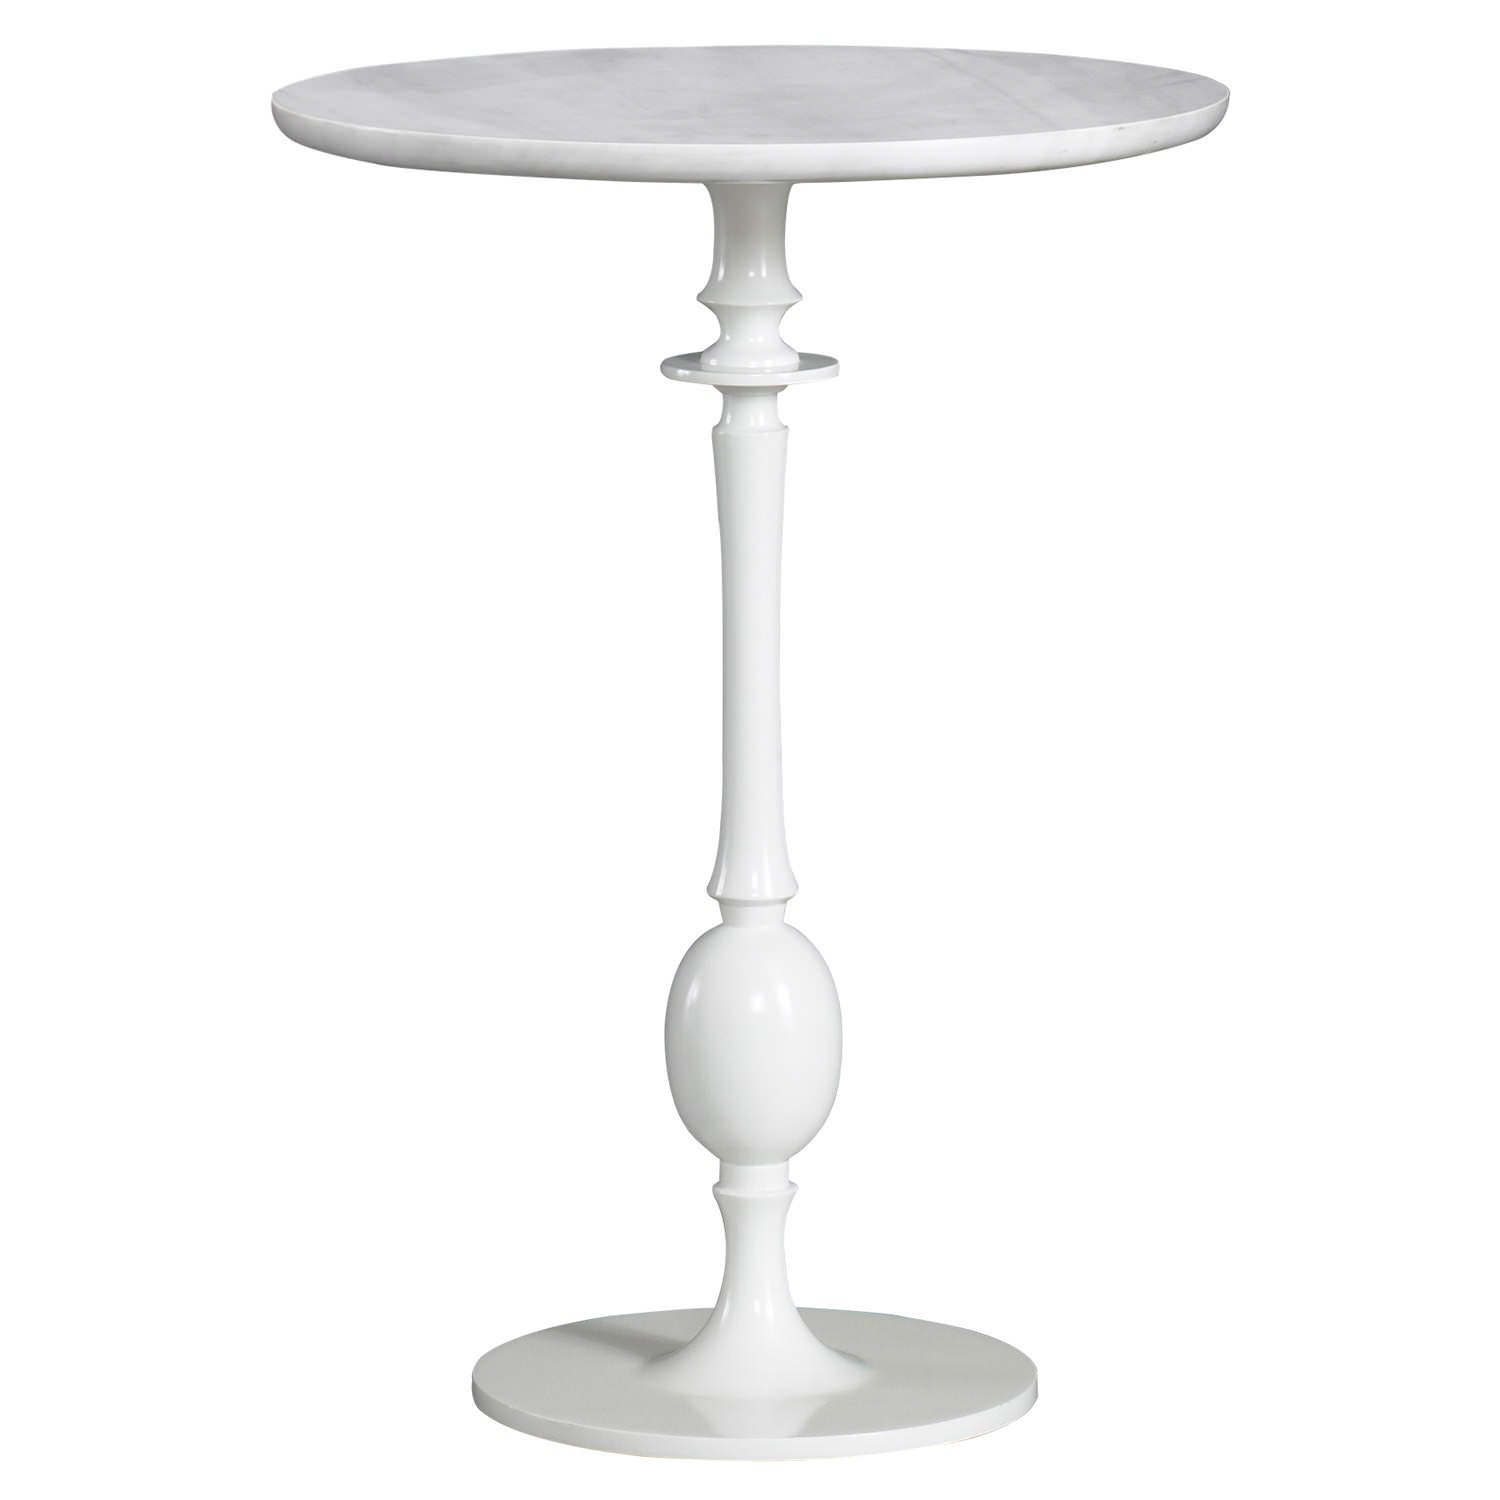 build pedestal accent table khandzoo home decor white inspiration gallery from nautical bar lights cabbage rose tiffany lamp wooden dining room chairs pier one outdoor rugs modern